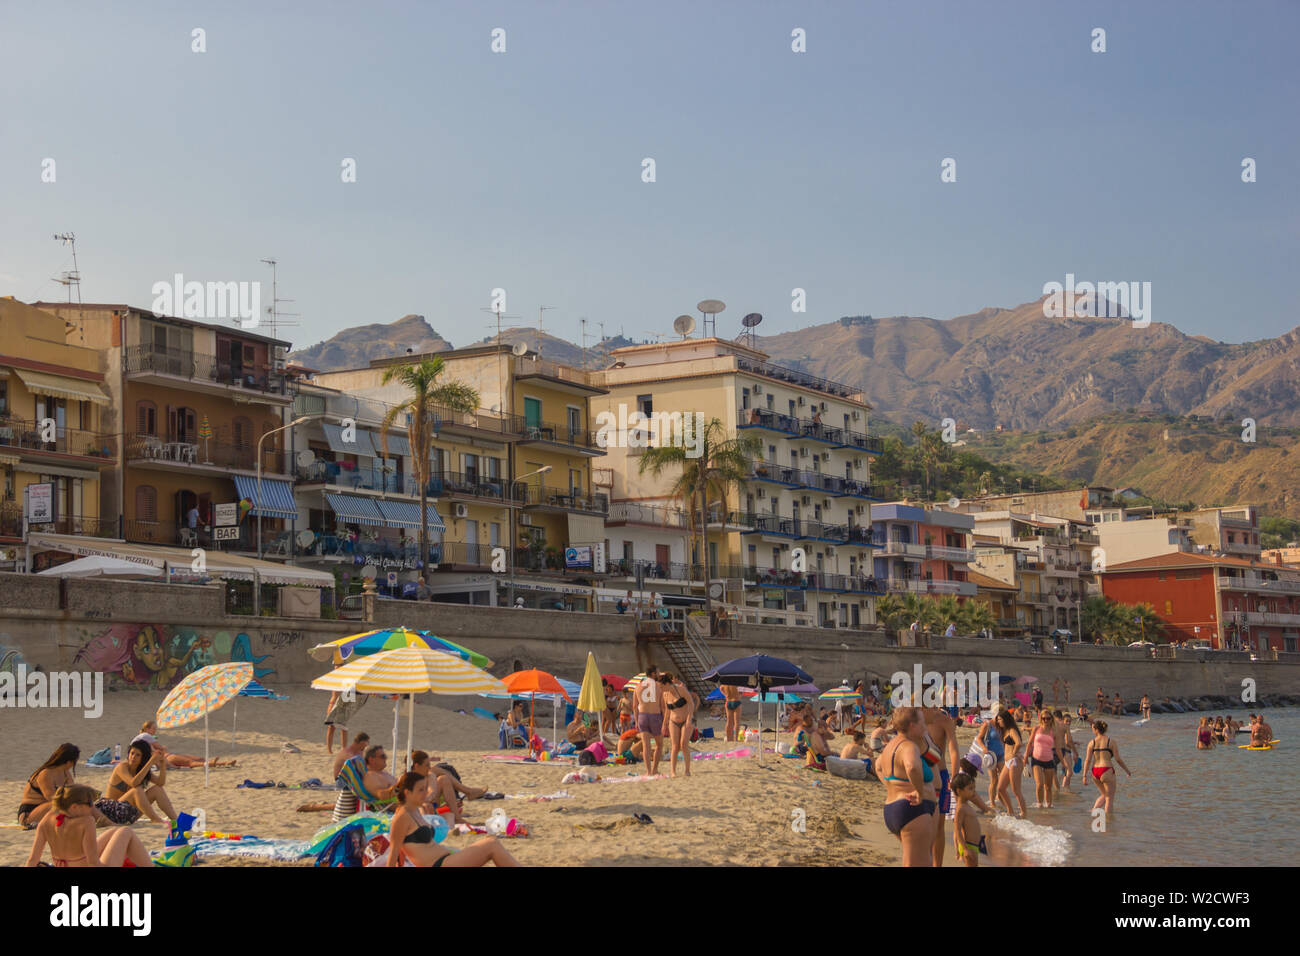 Giardini Naxos Sicily Italy 2019 view of the popular beach crowded of tourists and people, the buildings along the street facing the sea Stock Photo